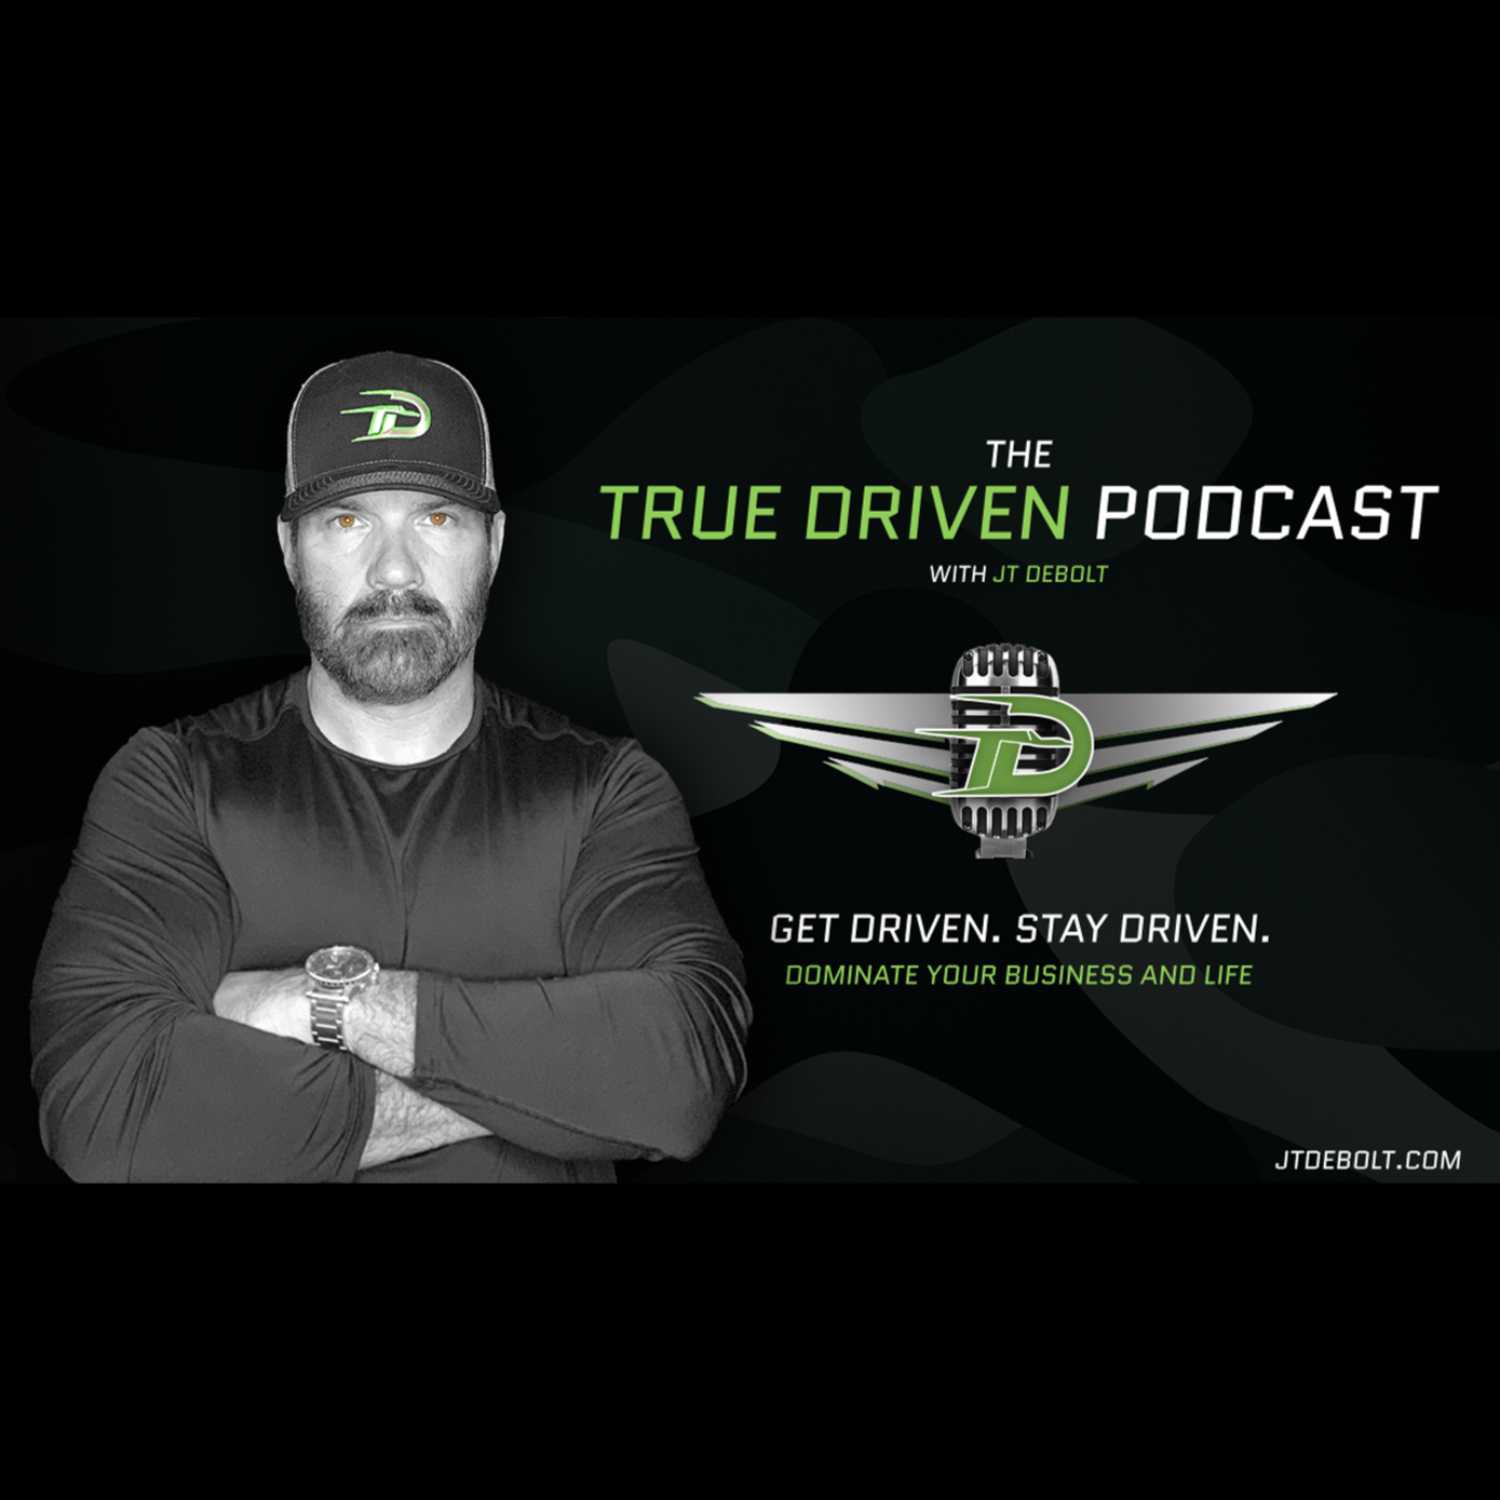 What To Do In Uncertain Times | True Driven™ Podcast | Episode 8